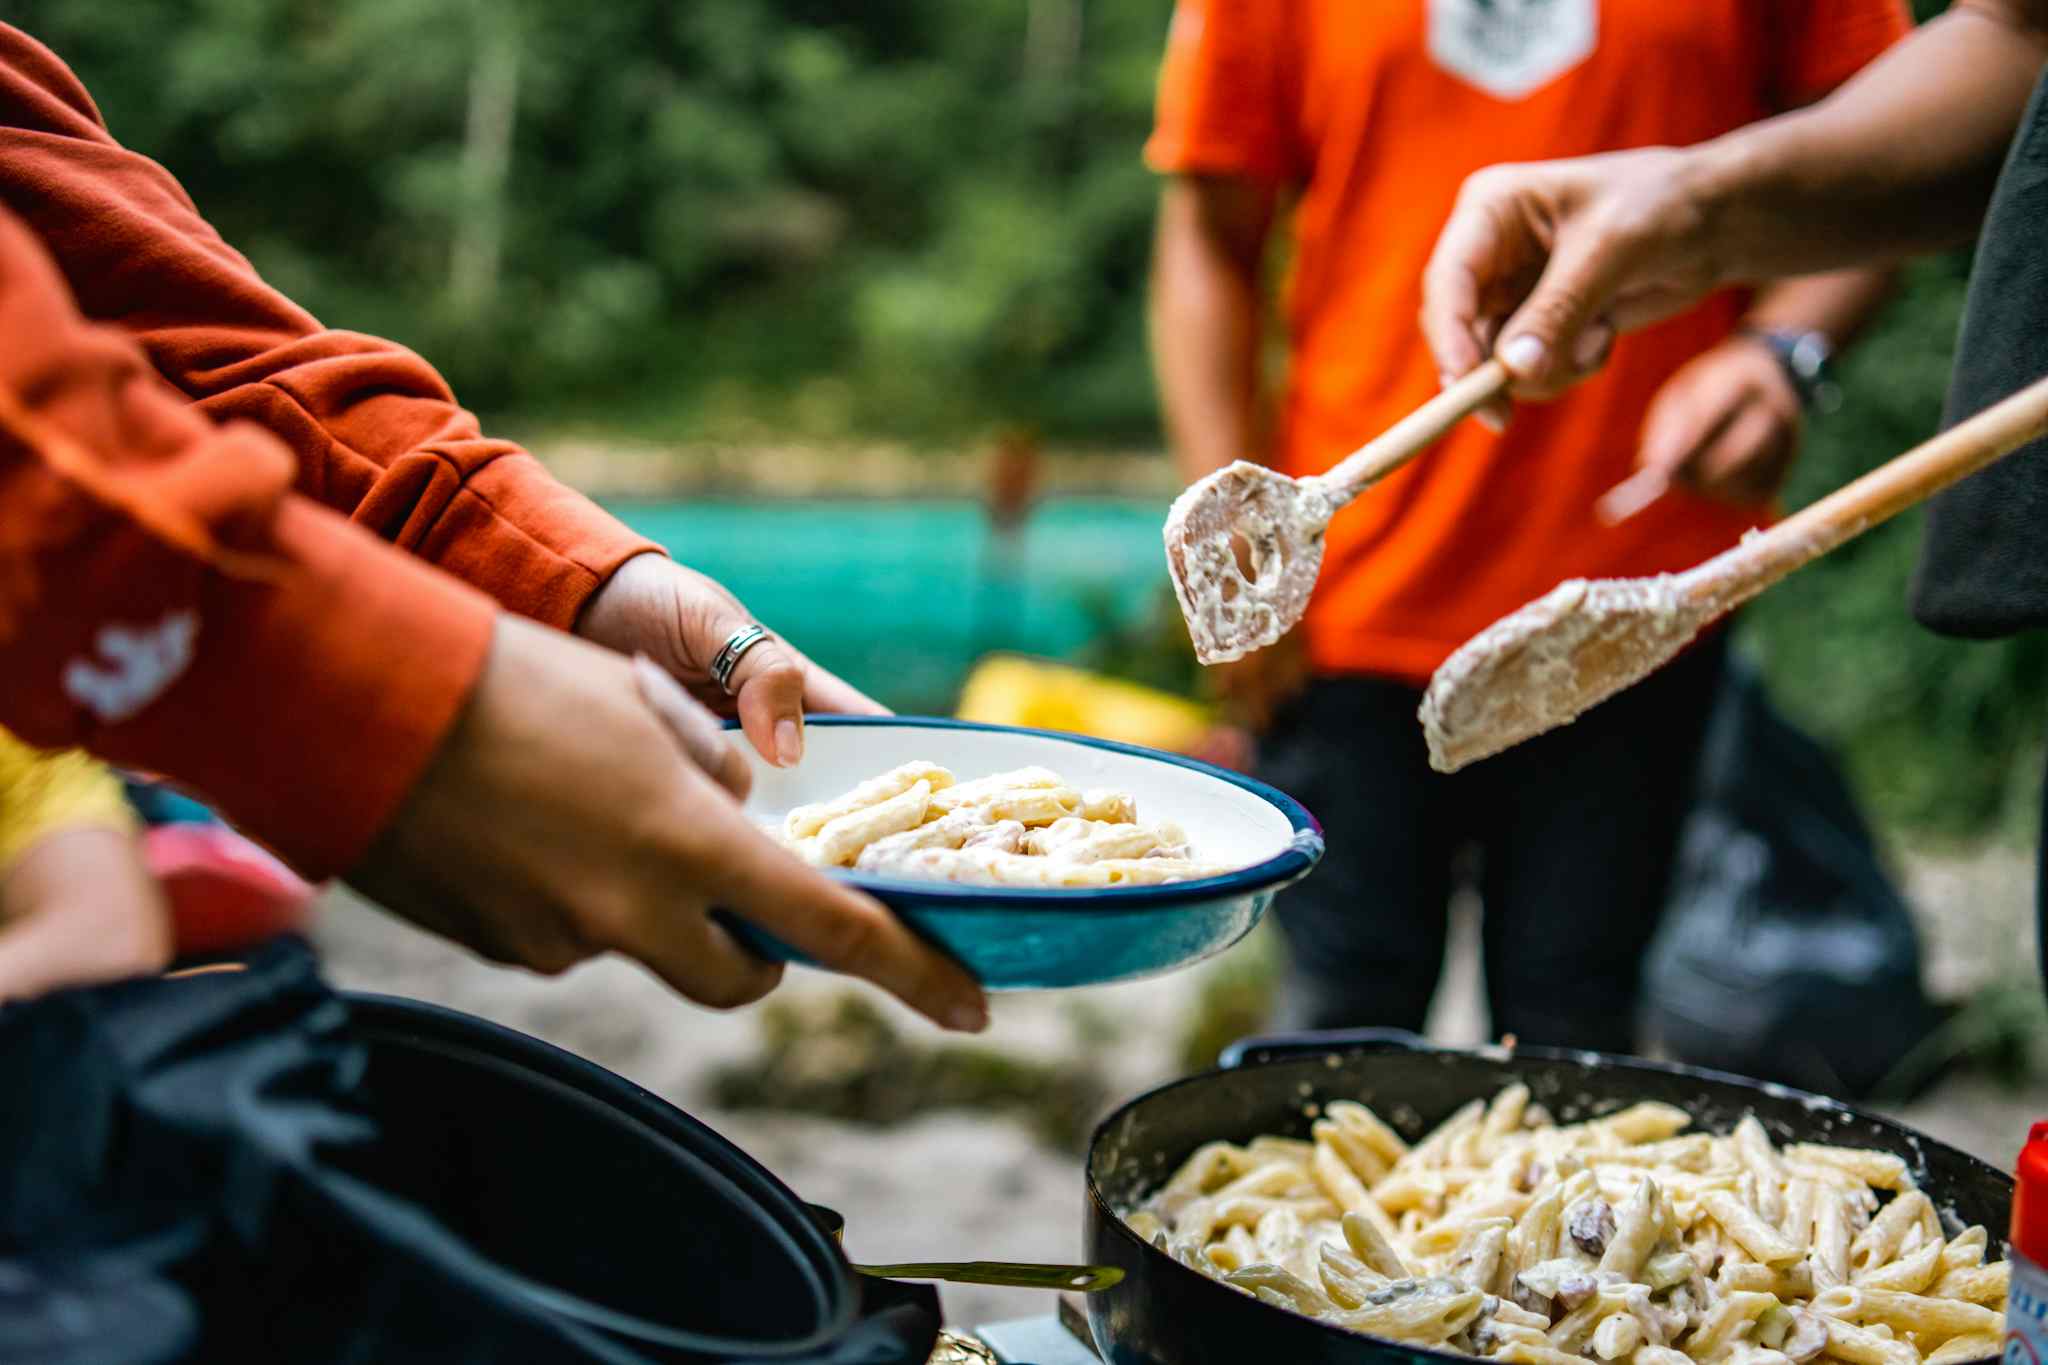 Food on the Tara River expedition, Montenegro
Photo: Host/Balkan Expedition